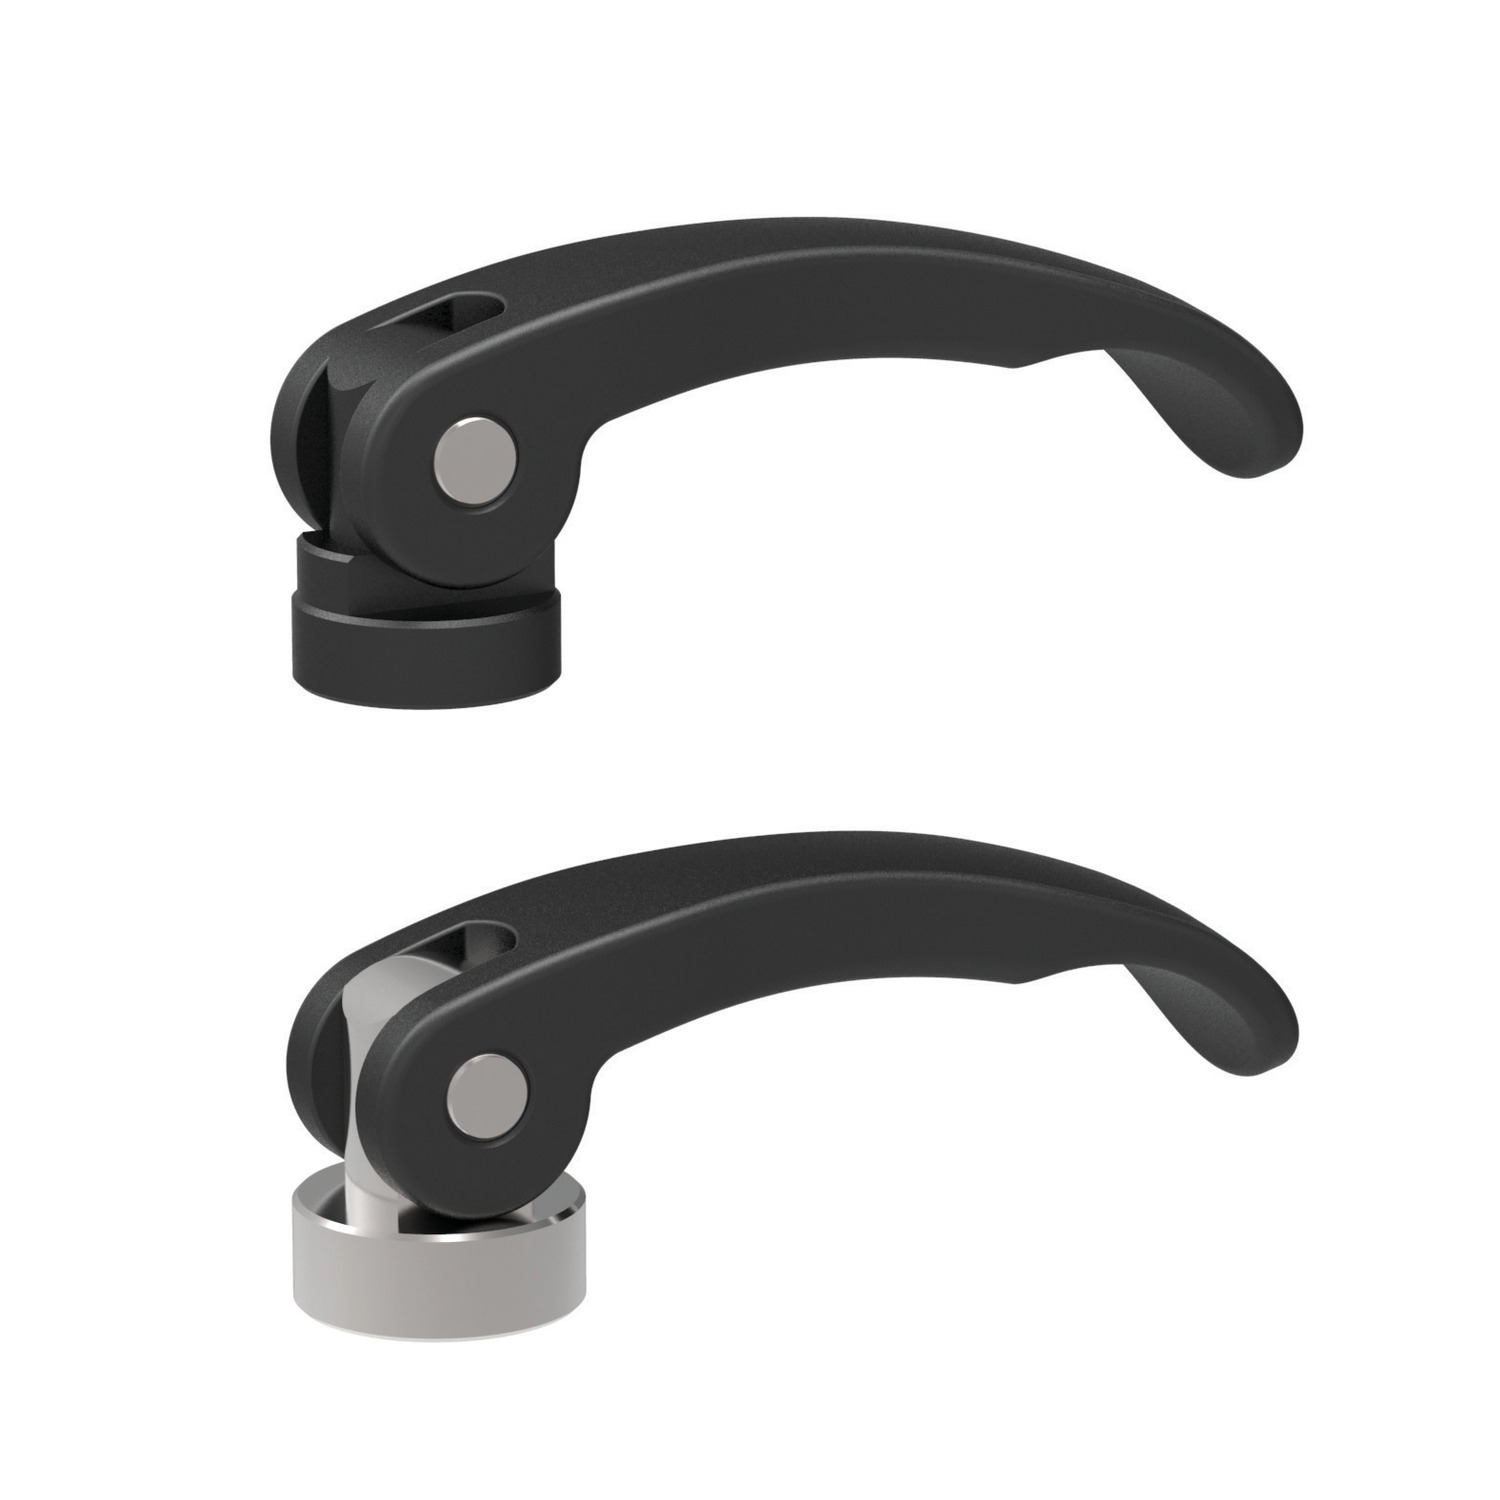 Product 18580.1, Cam Levers - Female fixed / 